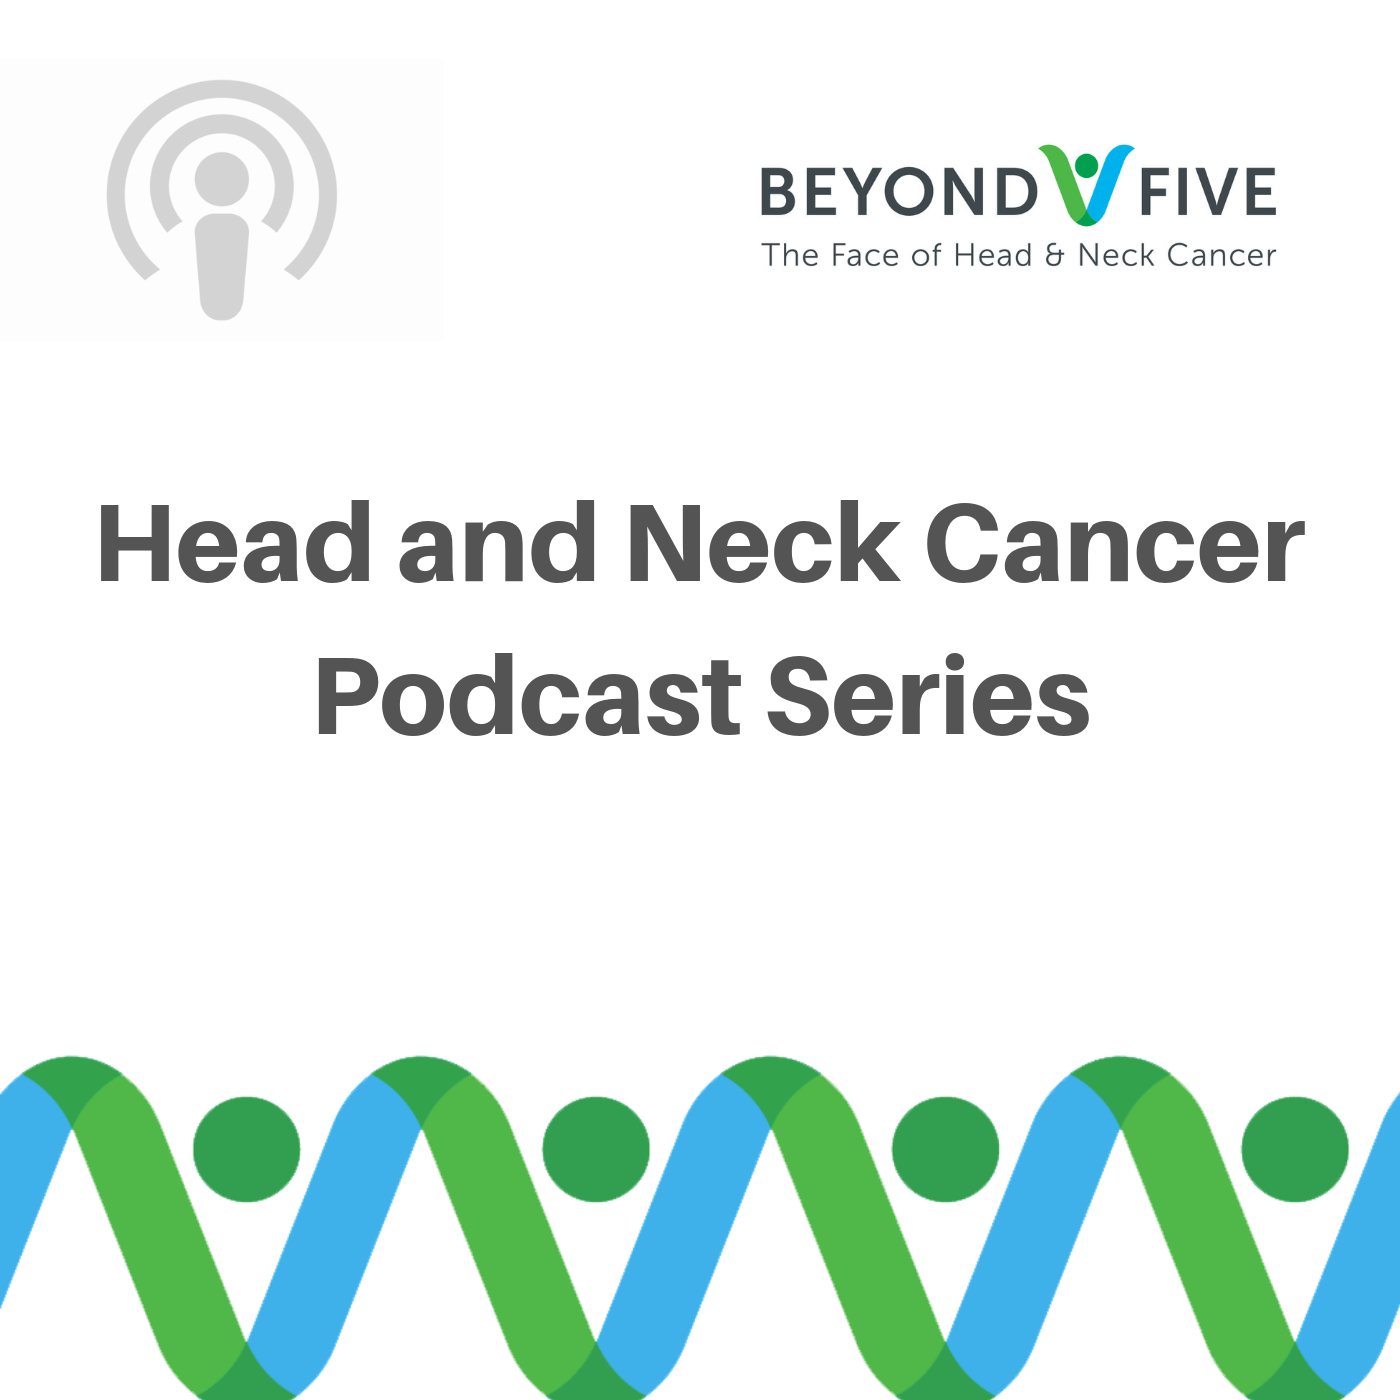 Beyond Five - The Face of Head and Neck Cancer